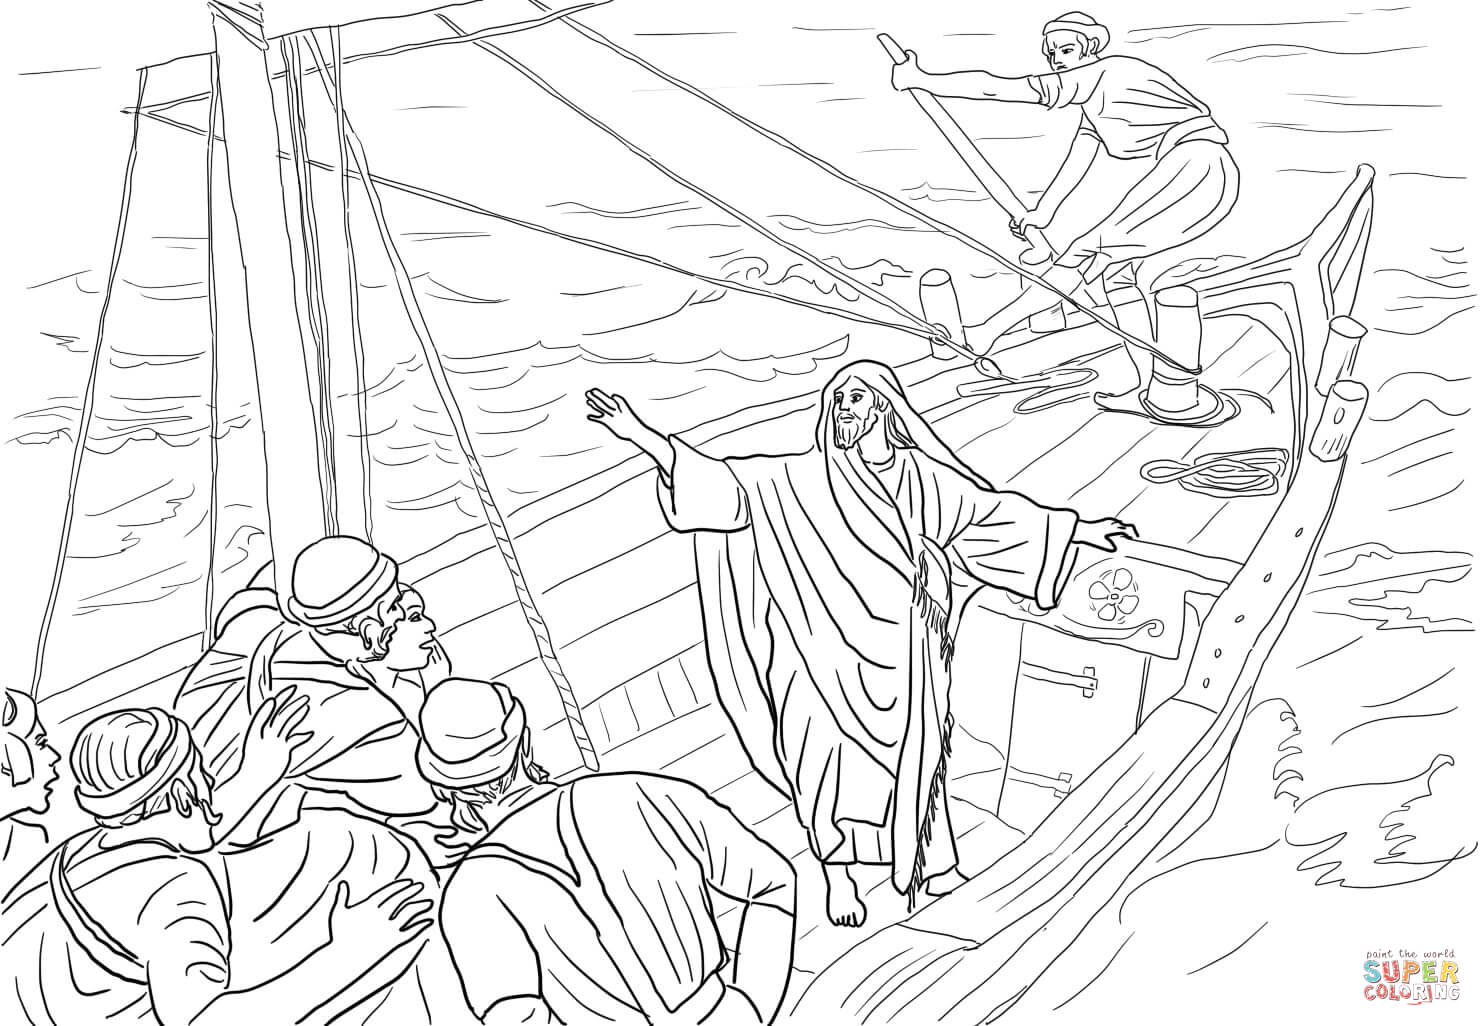 Coloring Page Jesus Calms The Storm - Coloring Home